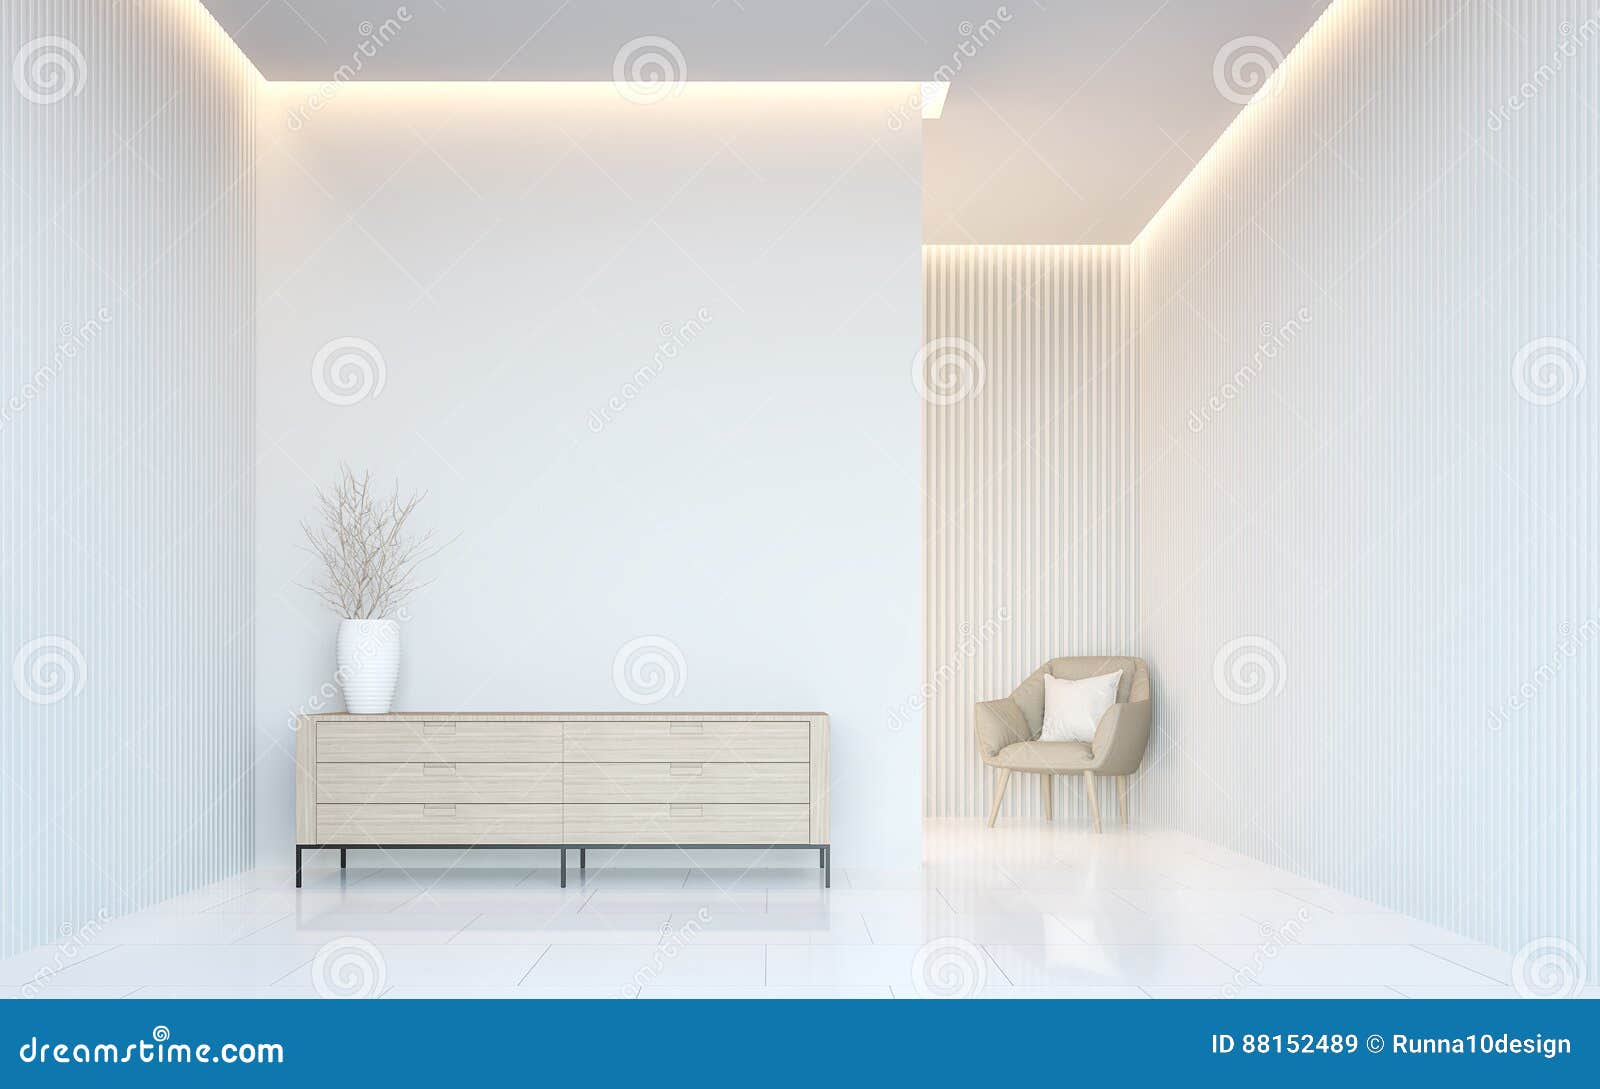 Home Interior Rendering With Empty Room Decorate Color Wall With Stock  Photo - Download Image Now - iStock